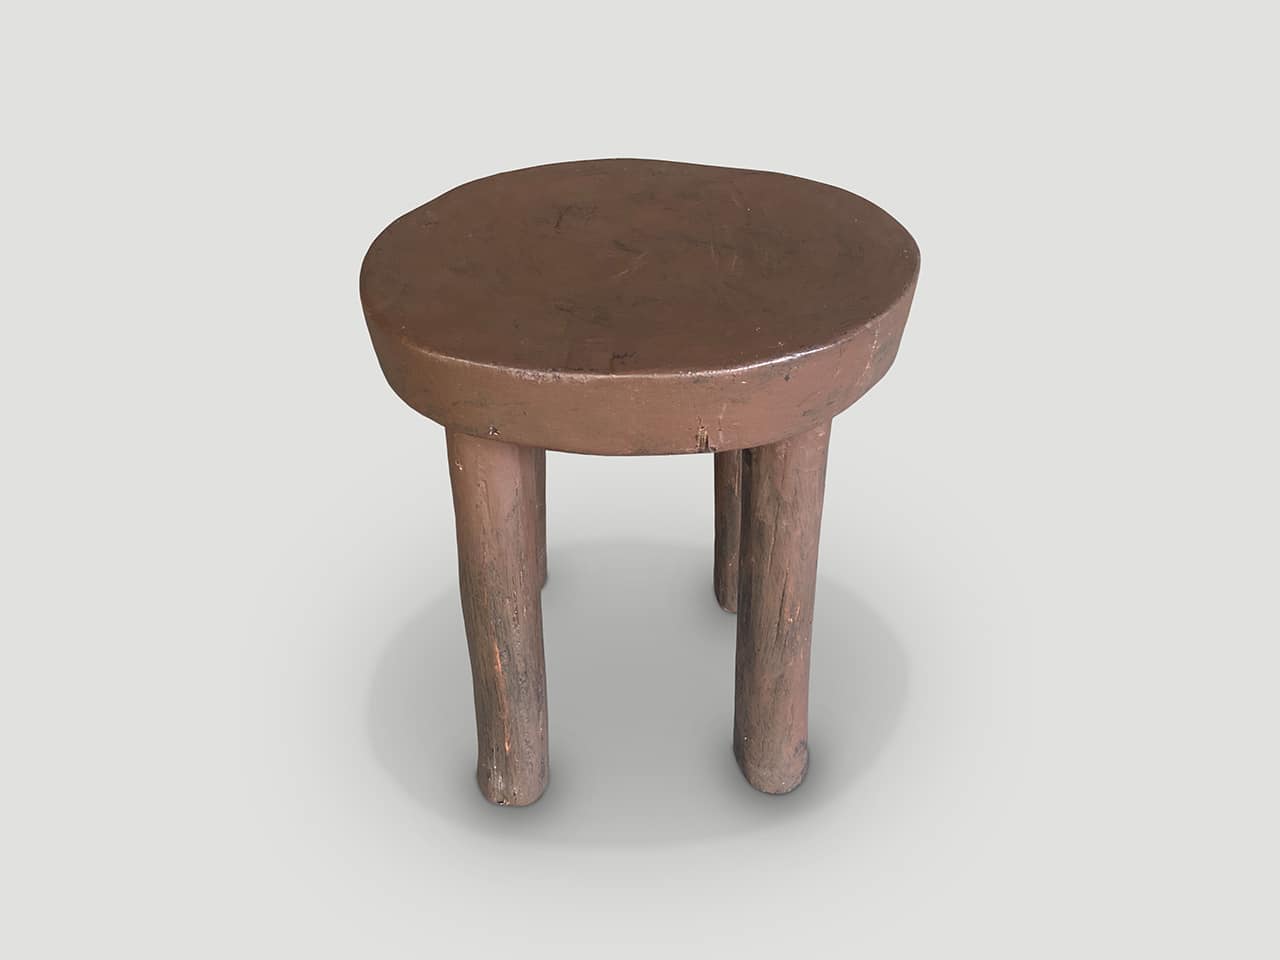 African side table or stool